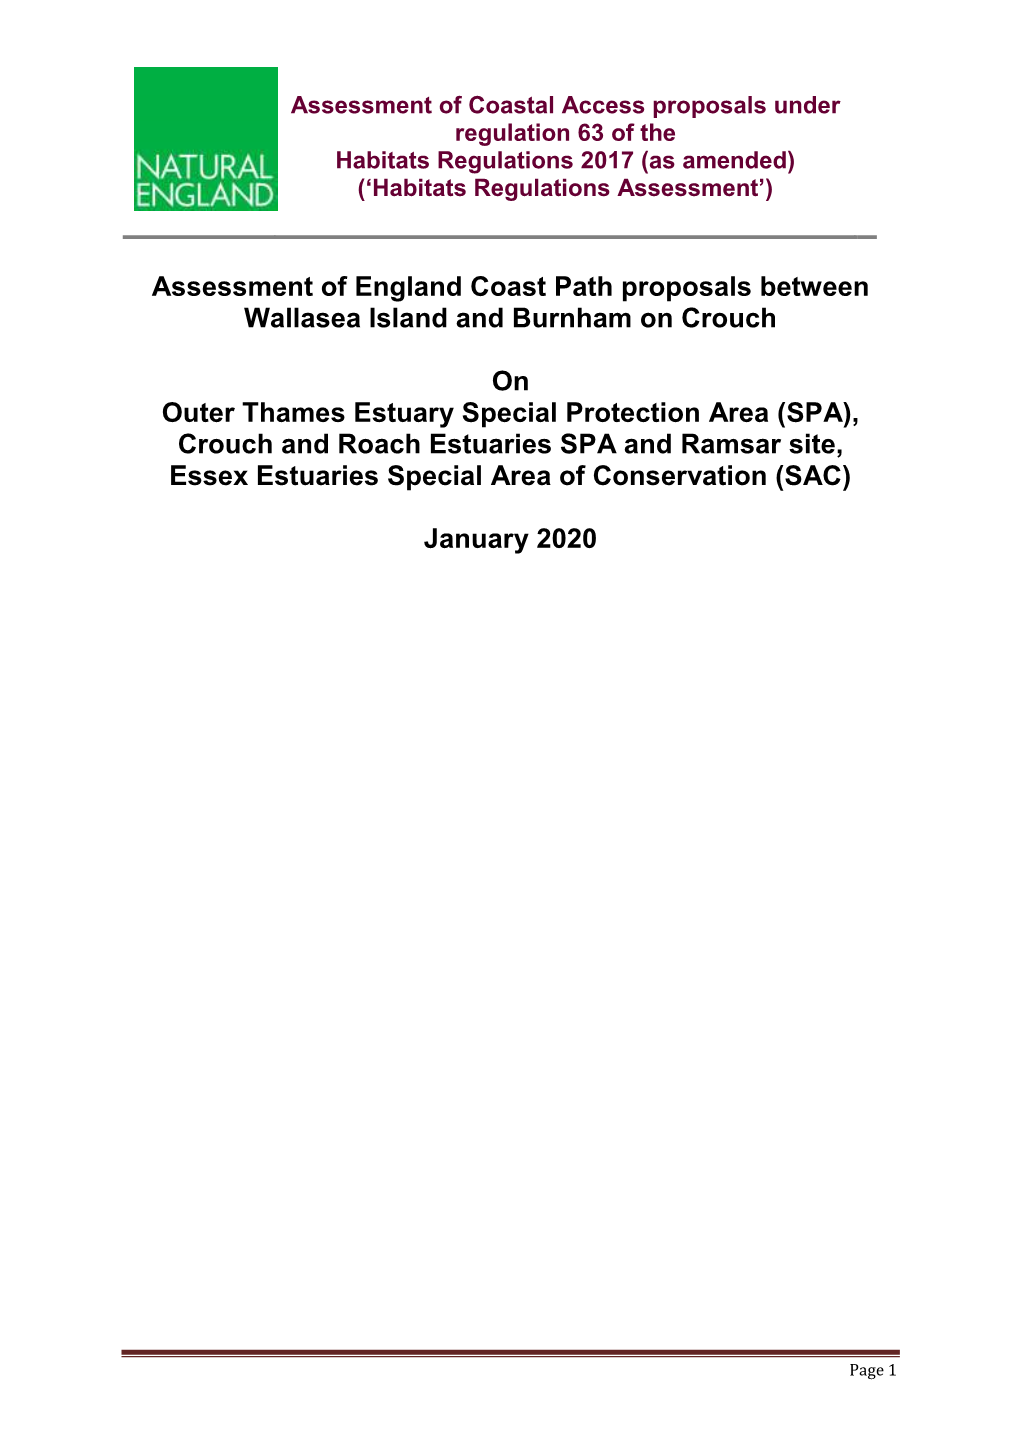 Assessment of England Coast Path Proposals Between Wallasea Island and Burnham on Crouch